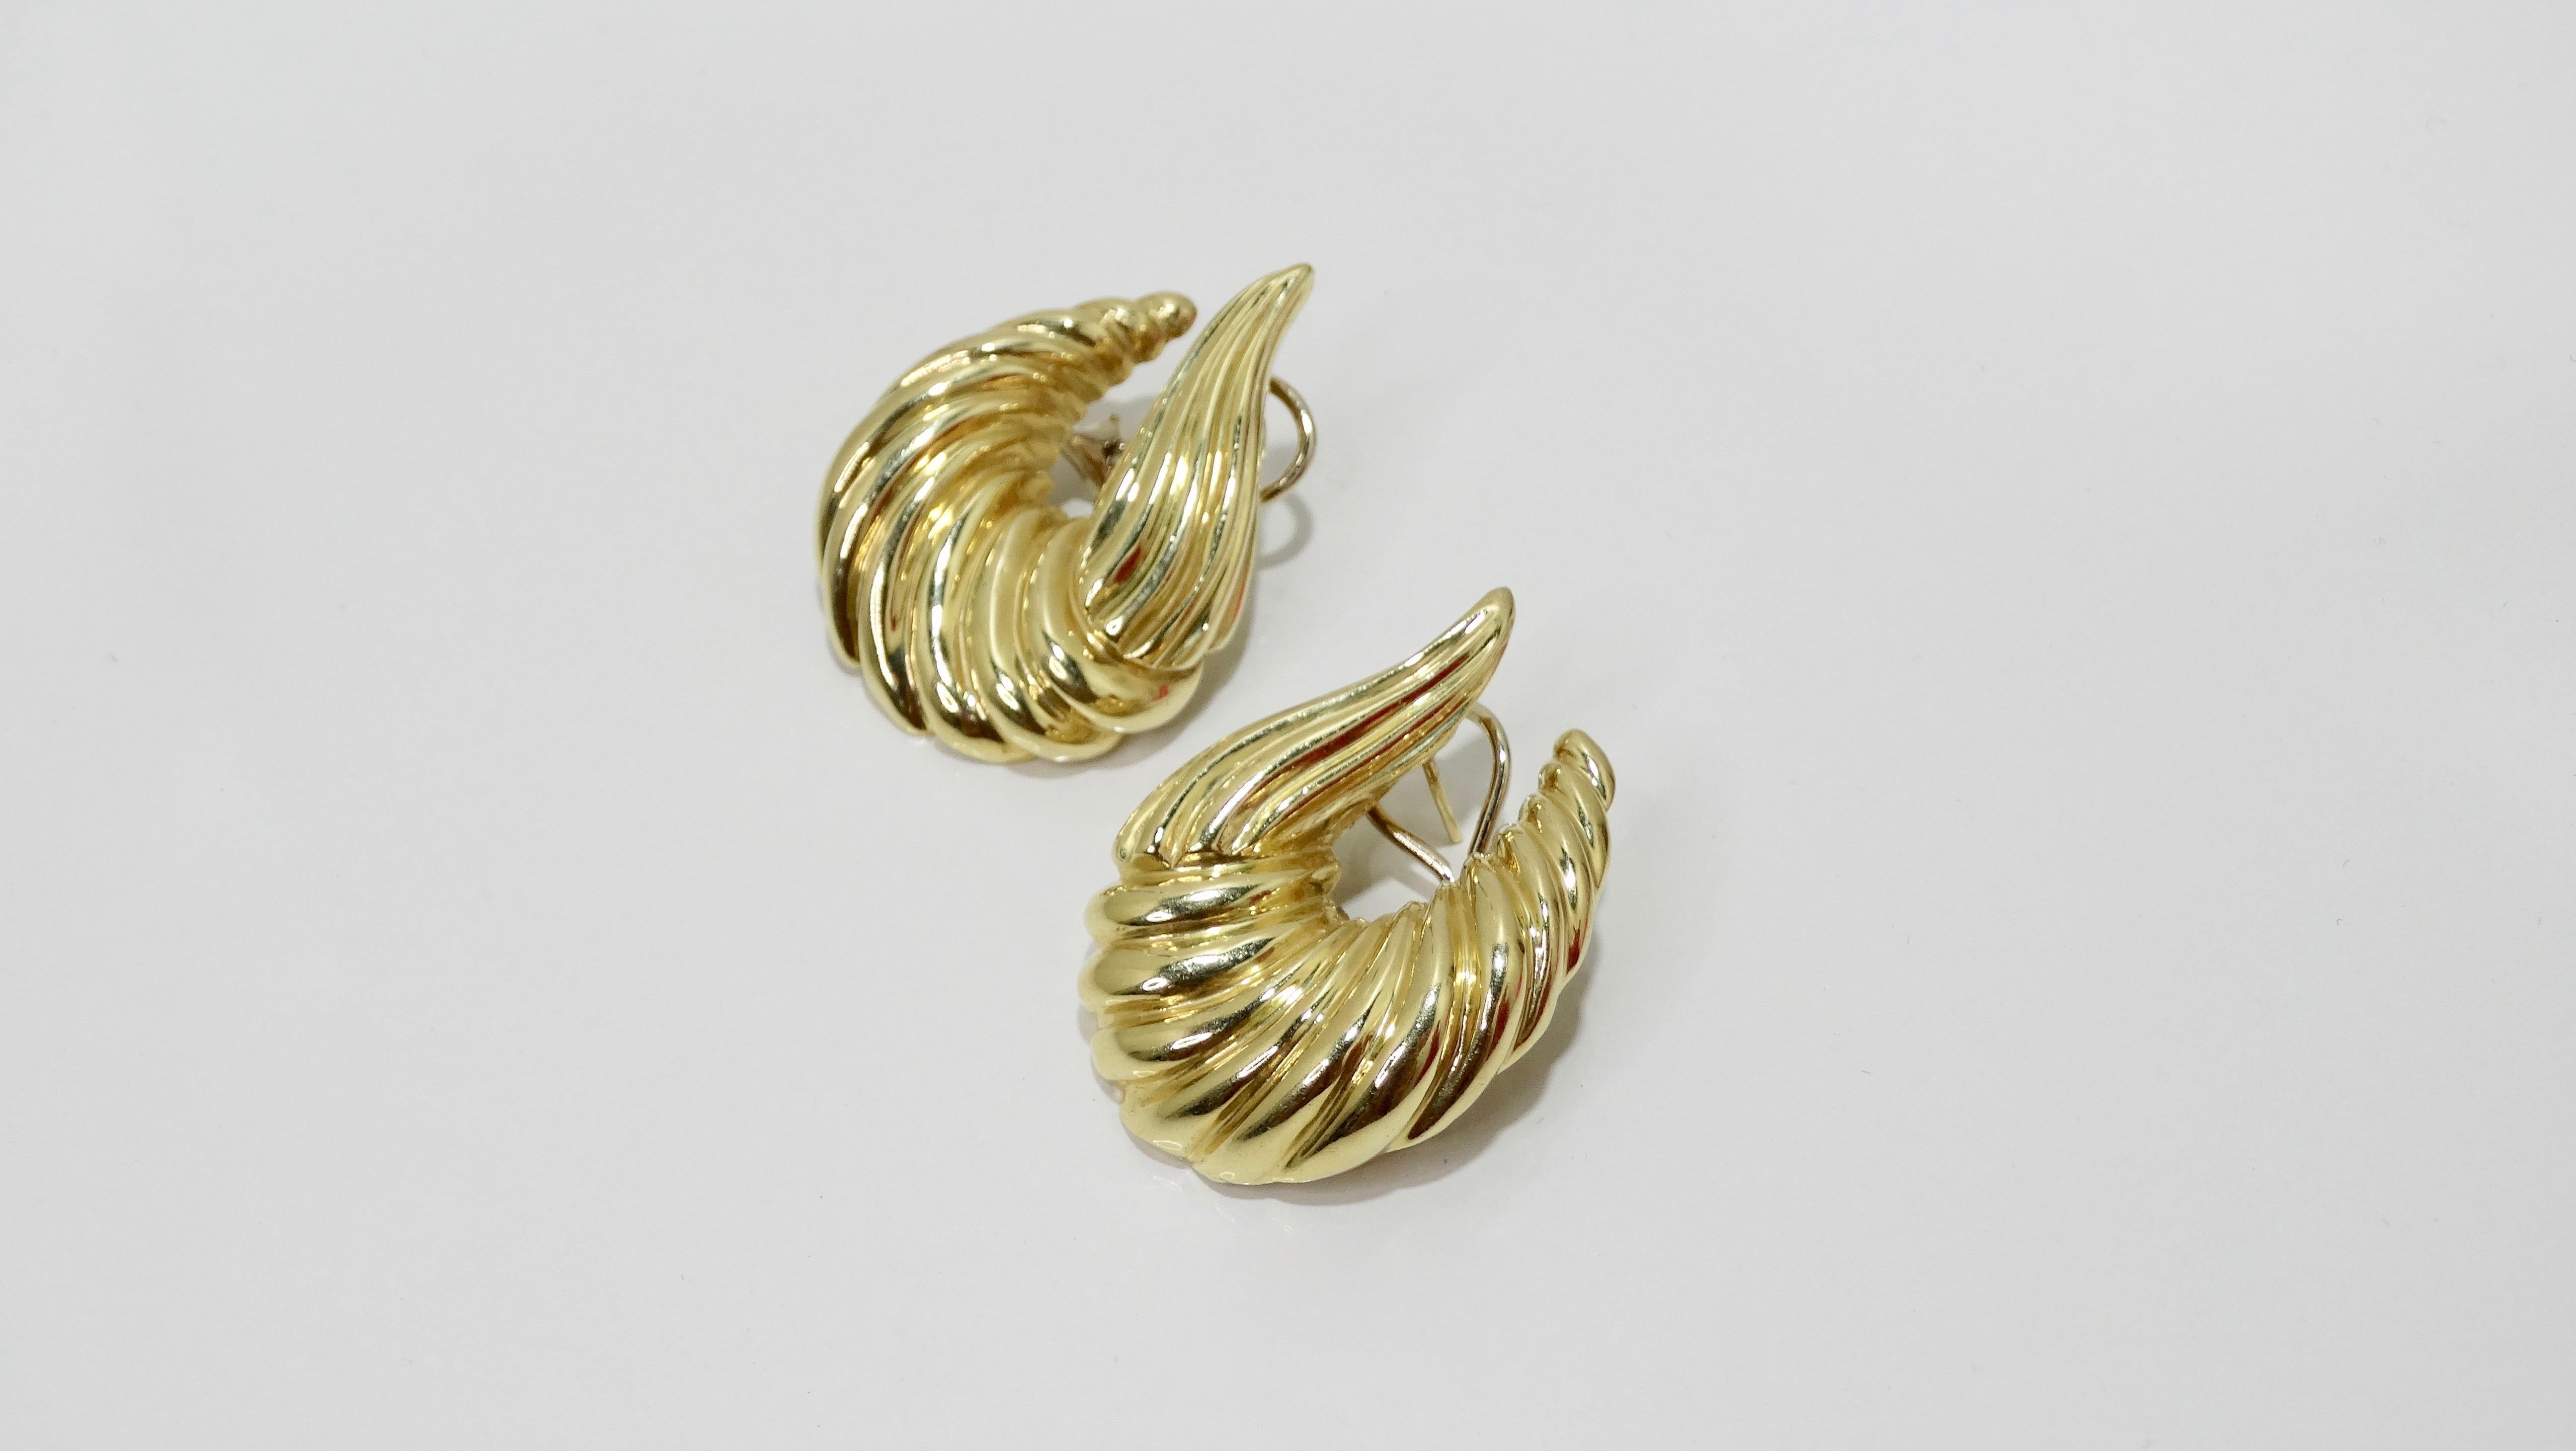 Complete your collection with these stunning earrings! Circa 1970s, these shrimp style earrings are crafted from shiny 14k gold and feature an asymmetrical ribbed design. Earrings have pierced lever back closure for a secure wear. Total weight is